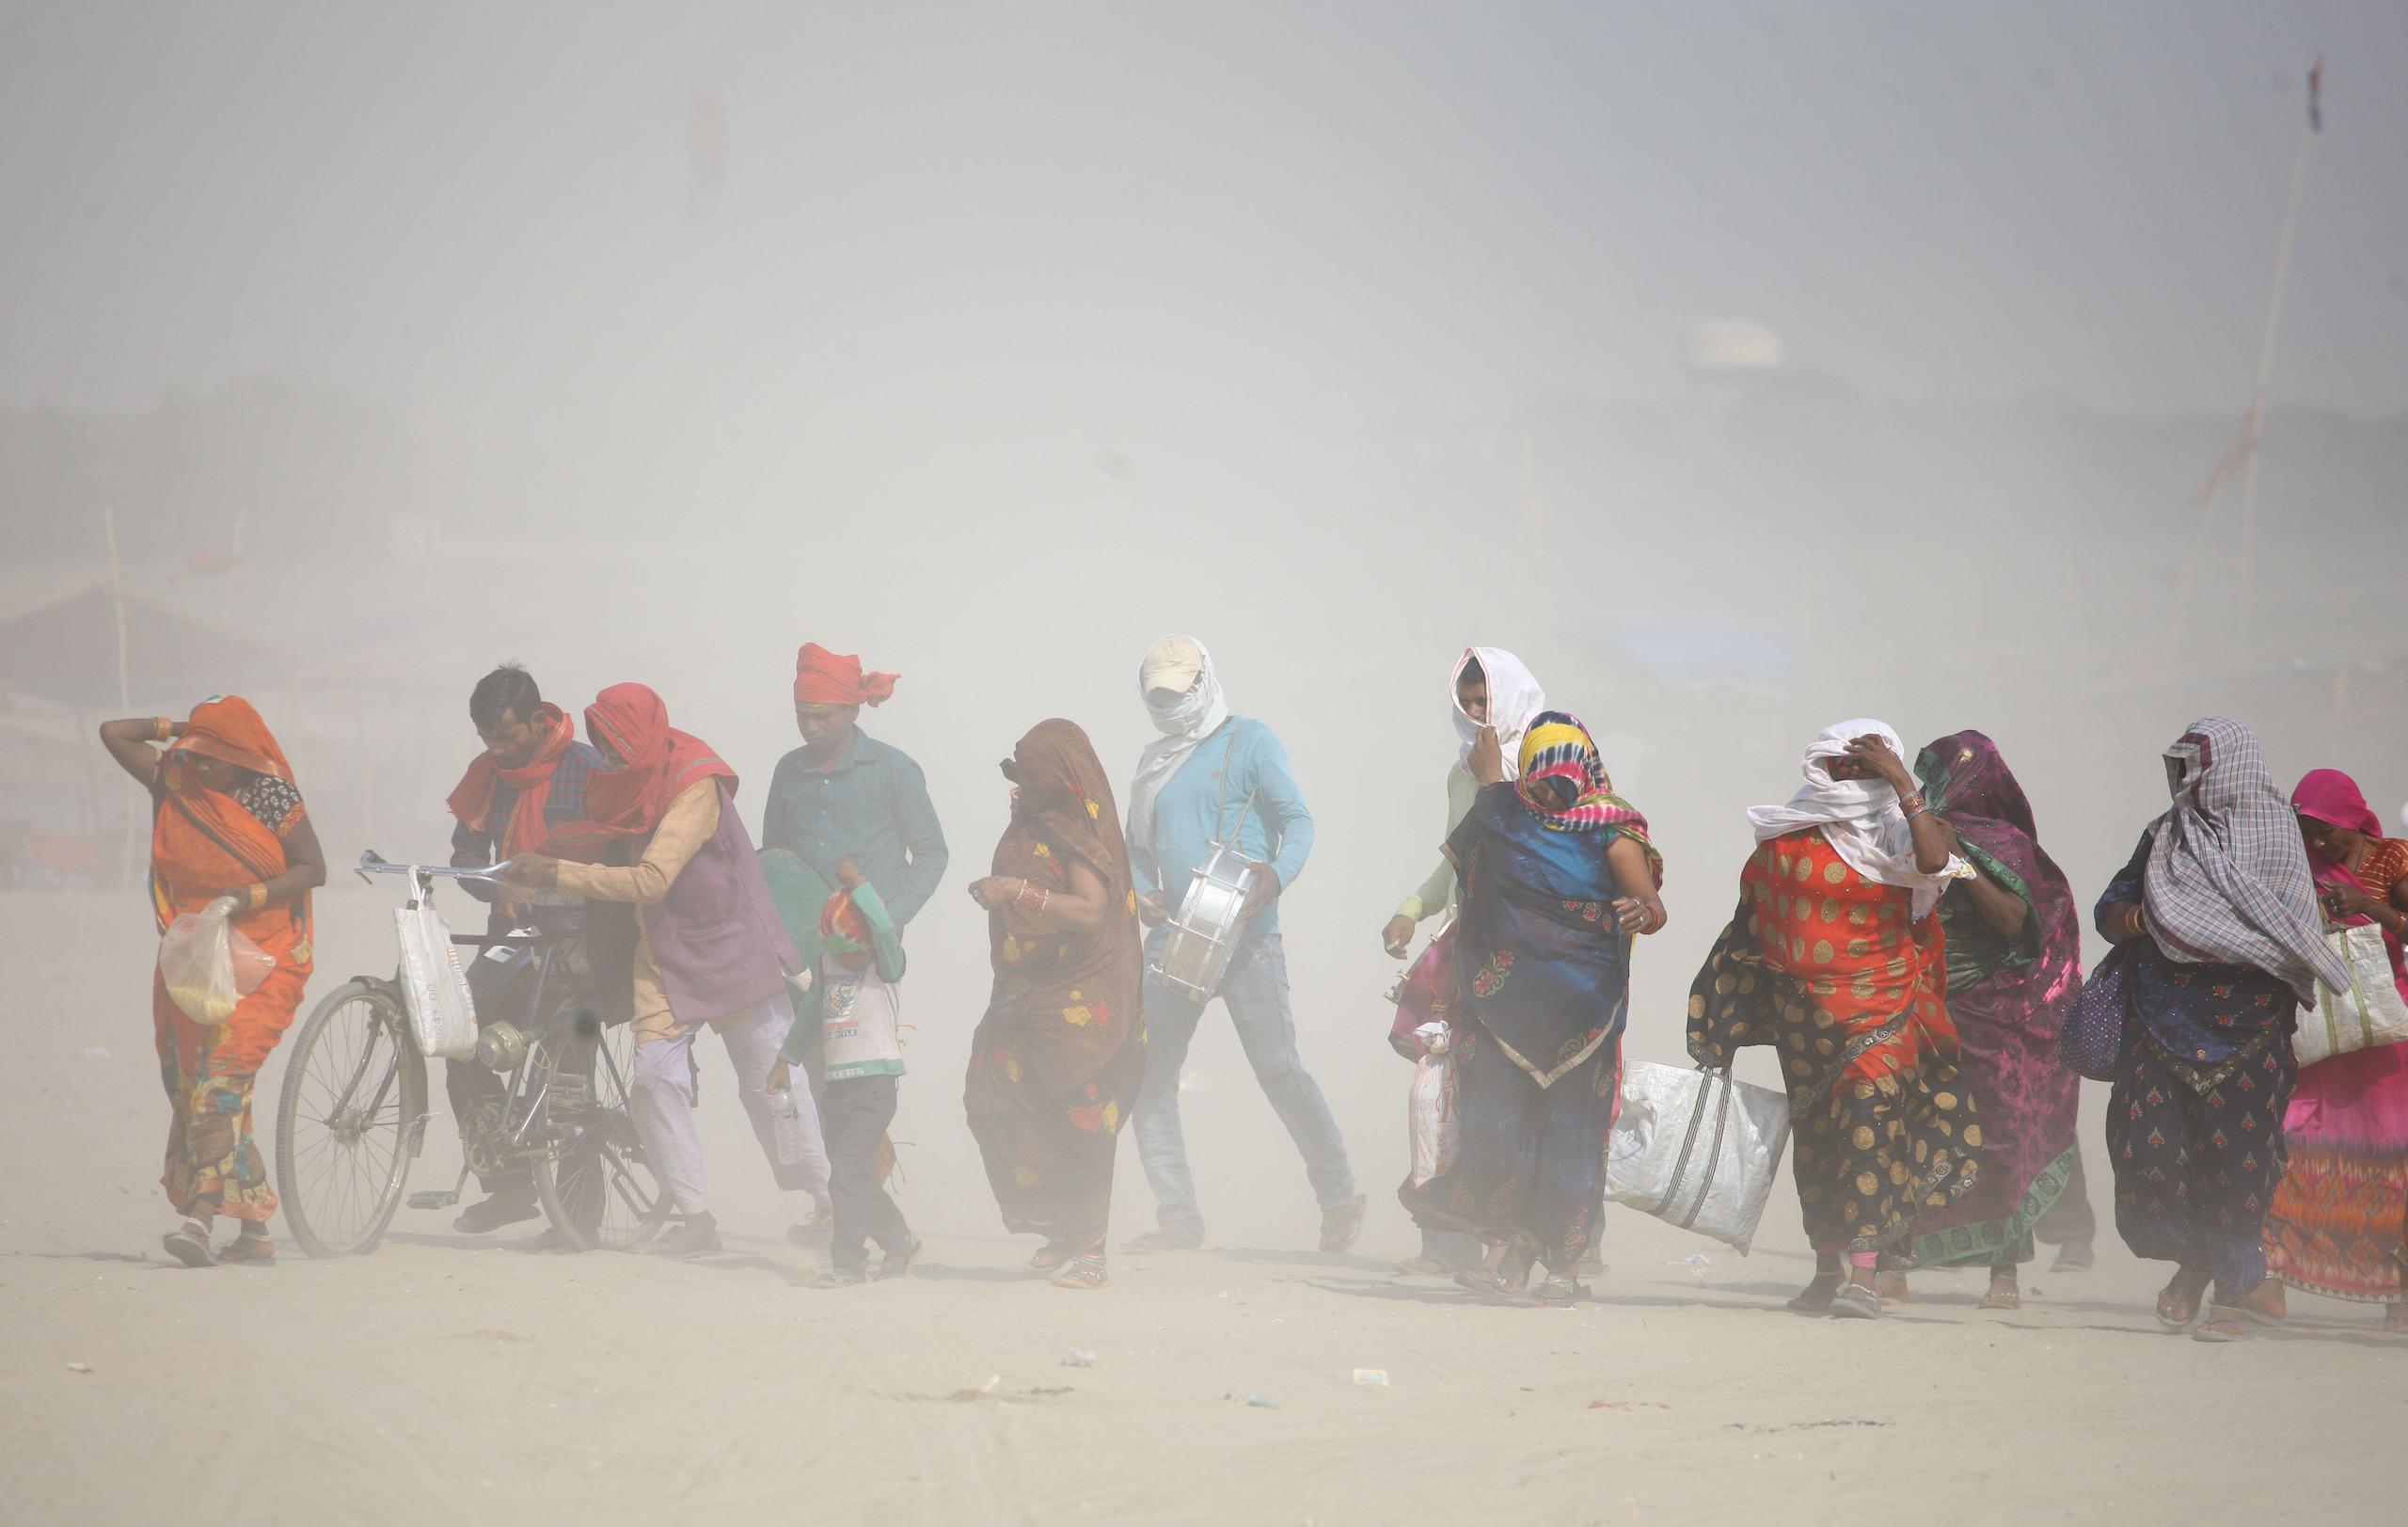 <p>Workers commute during heatwave conditions in Prayagraj, in India’s Uttar Pradesh state, on 7 June 2022. This year, the state has suffered extreme heat once again. (Image: Ritesh Shukla / Alamy)</p>